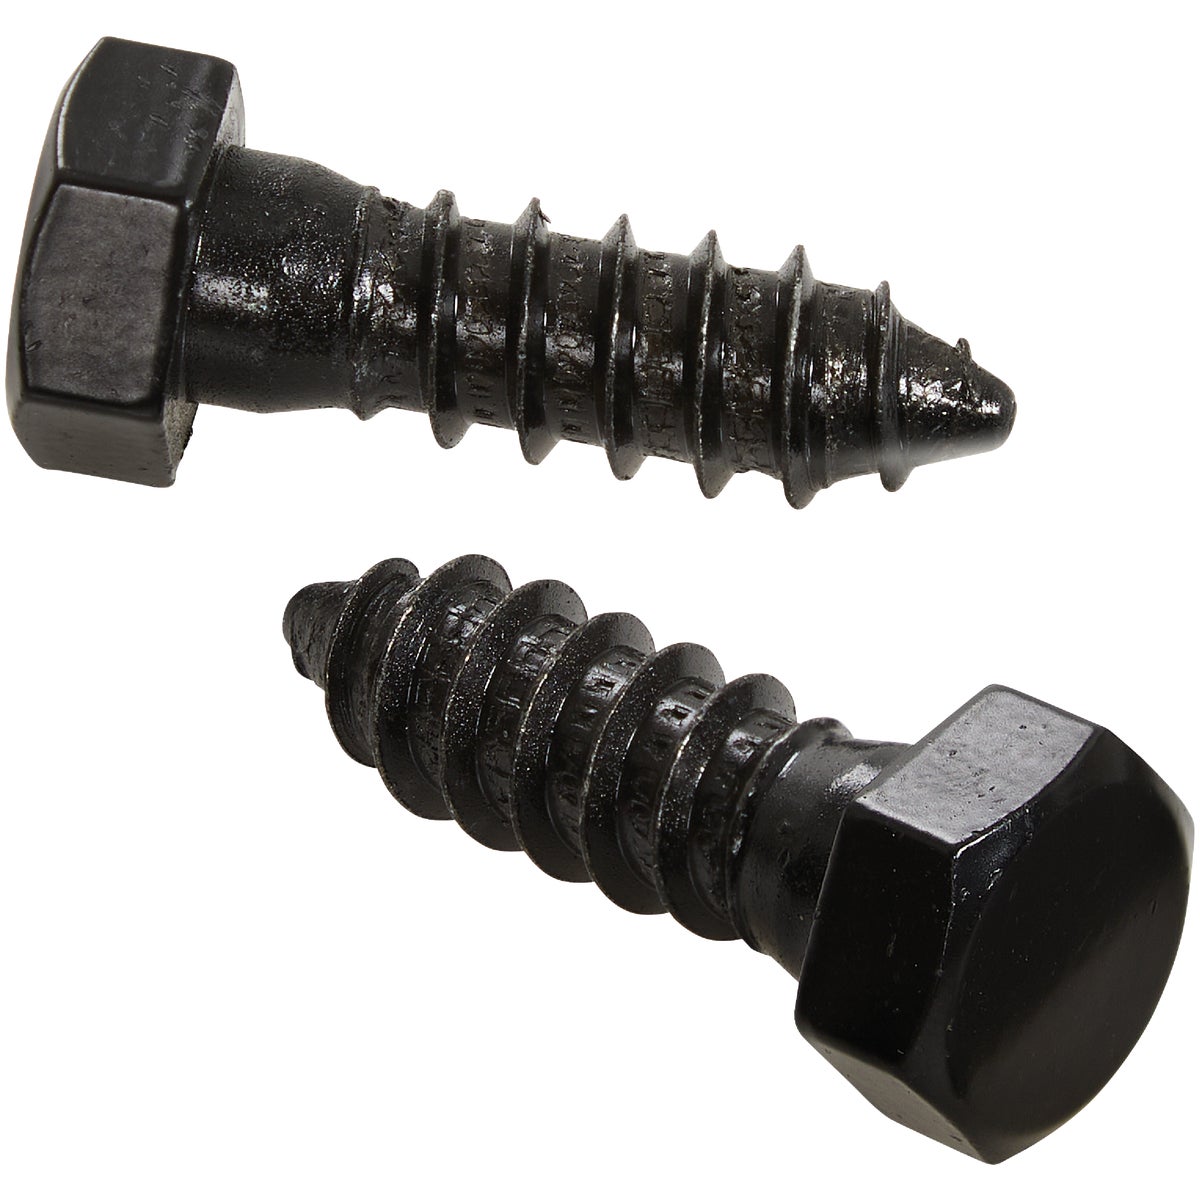 National N800-123 National Structural Lag Screw (12-Count) N800-123